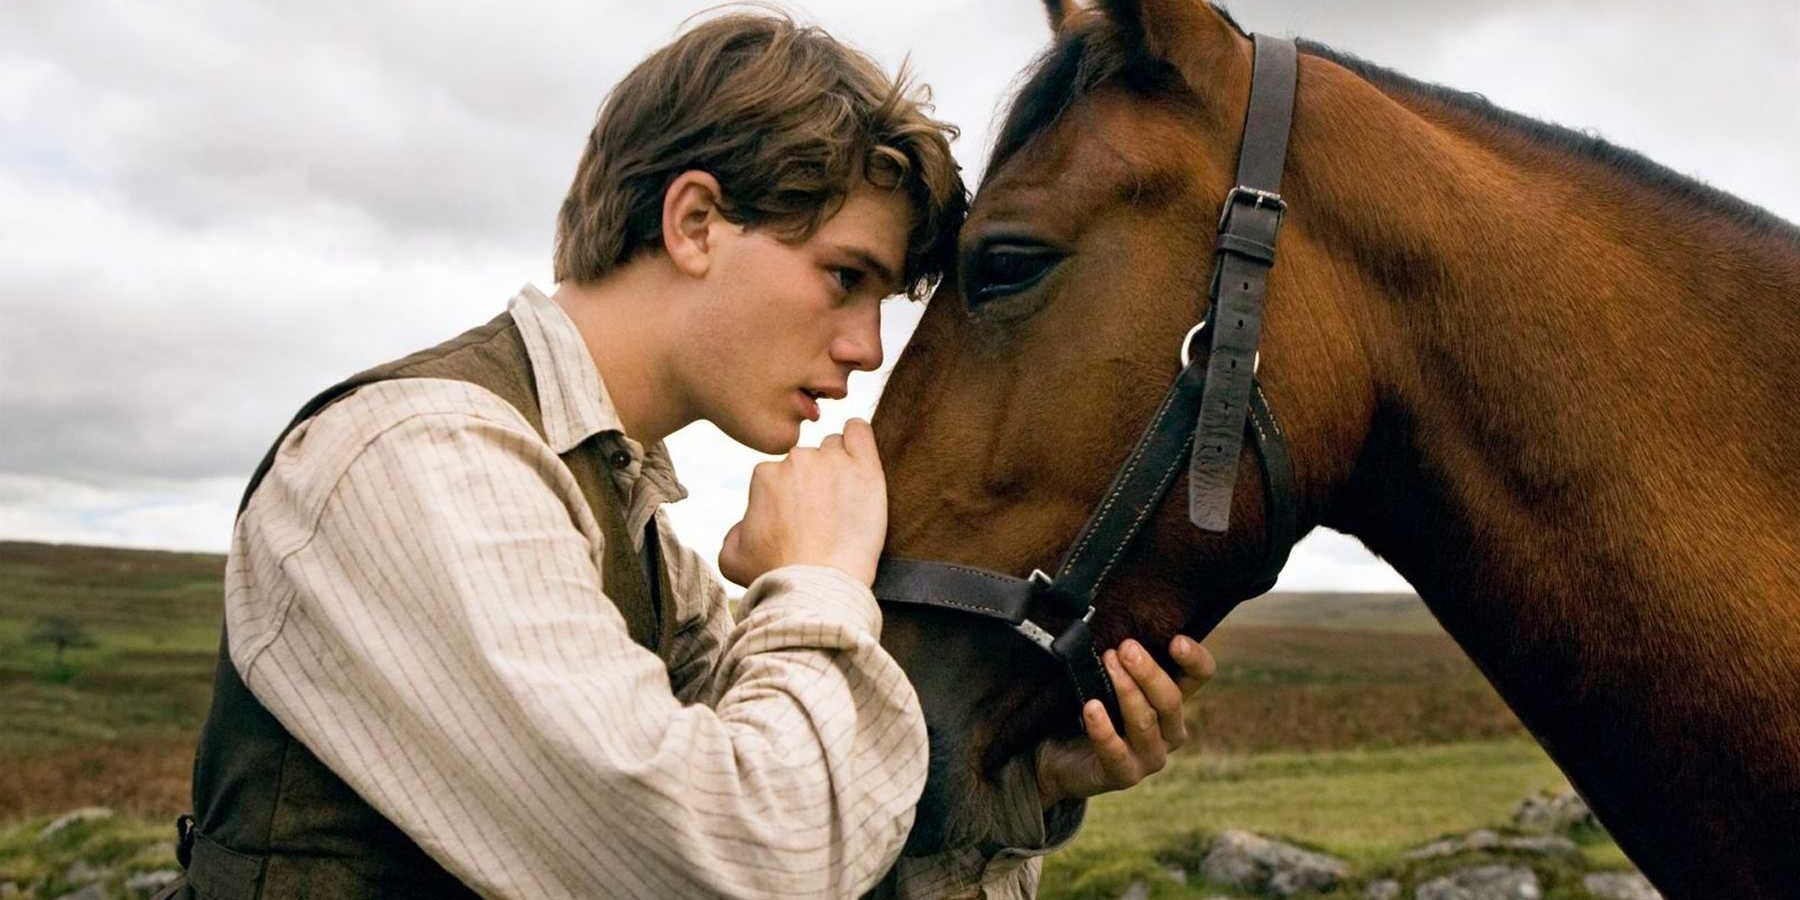 Albert and the horse in War Horse